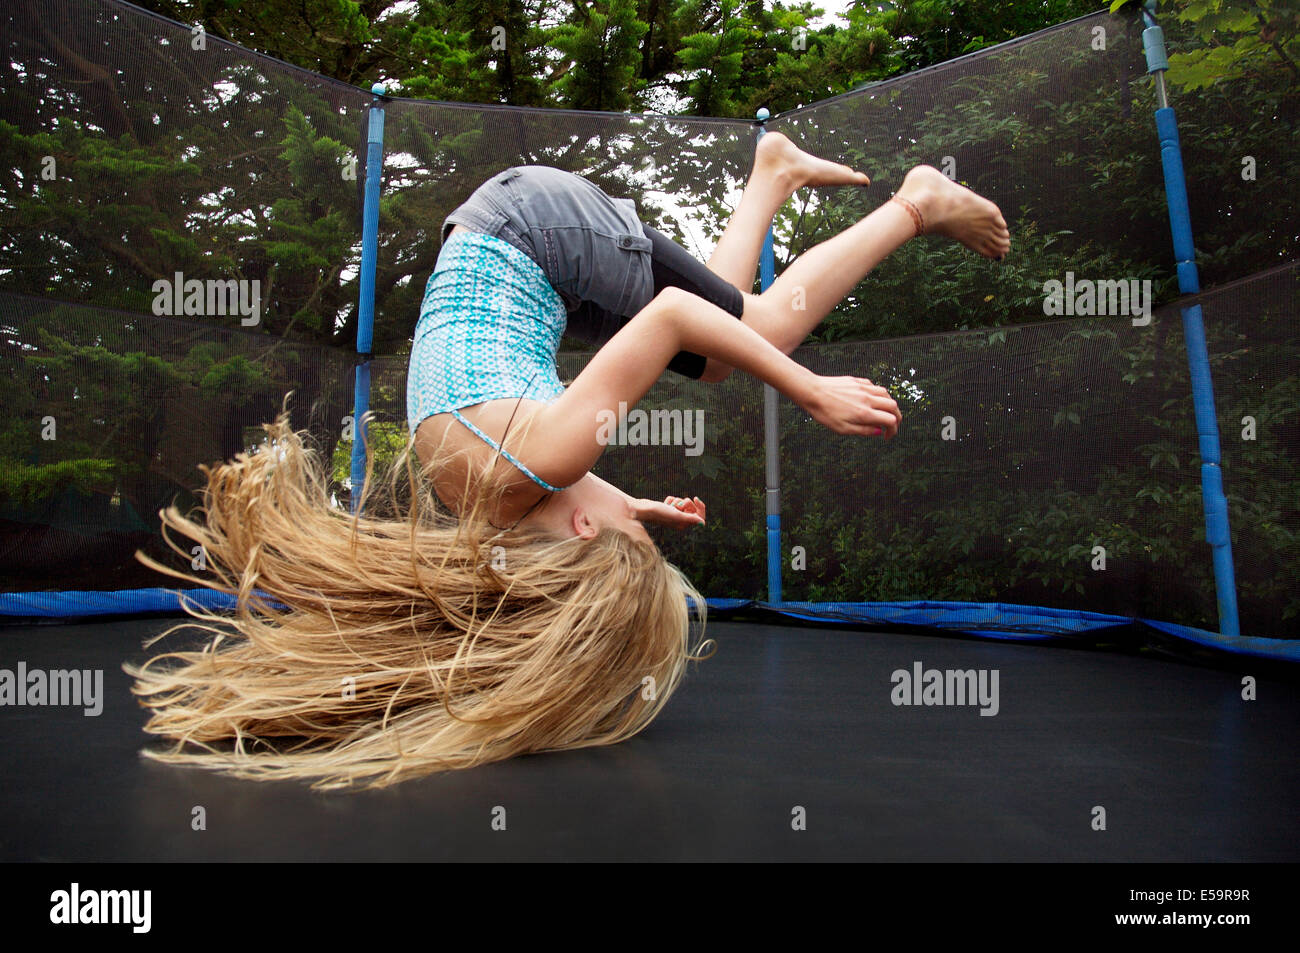 Girl jumping on trampoline outdoors Stock Photo